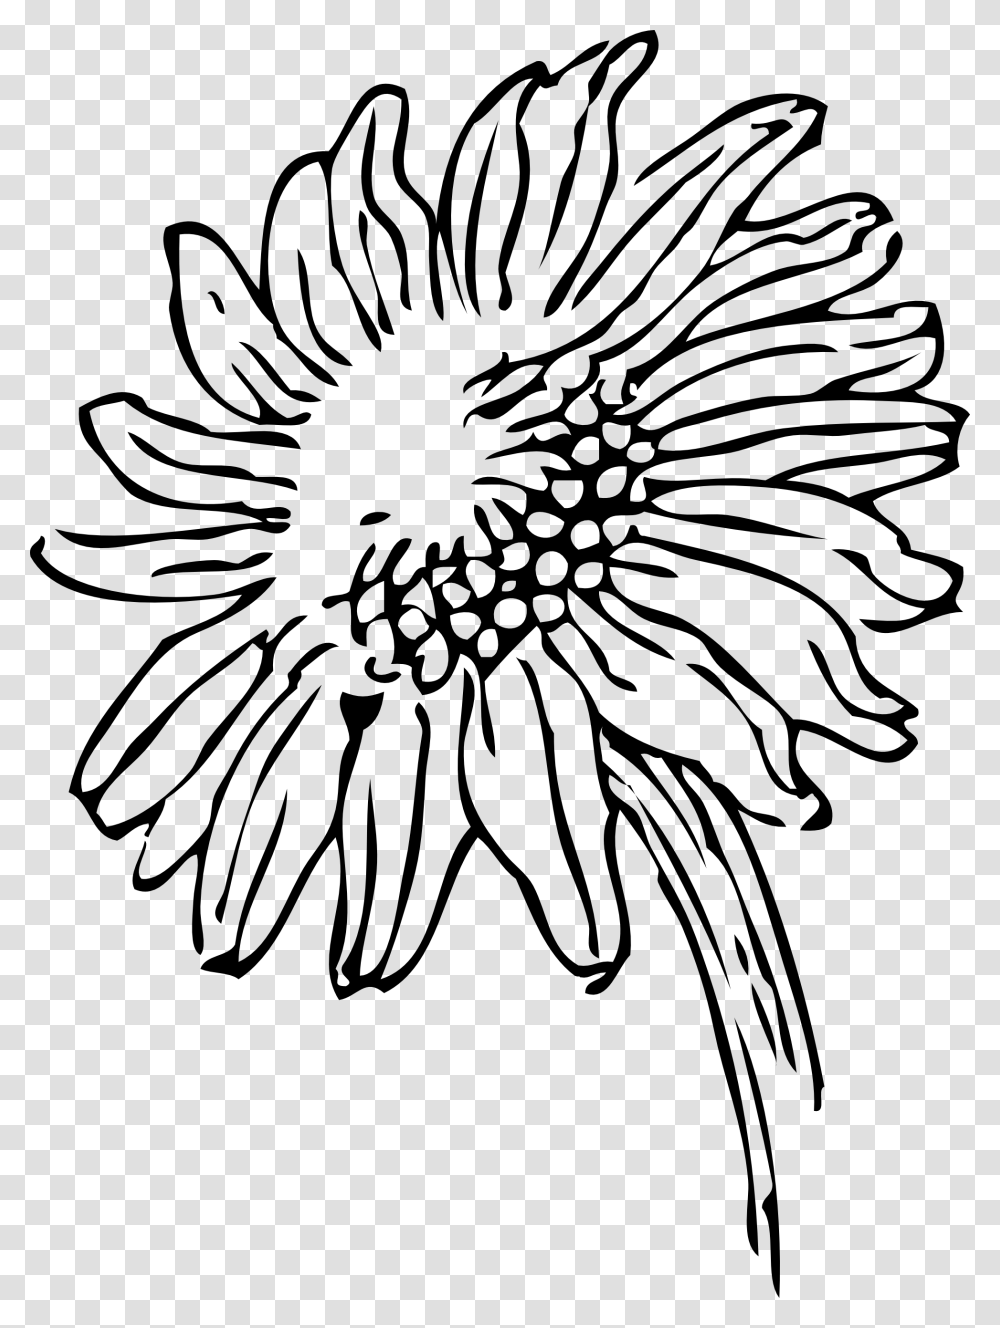 Sunflower Black And White Black And White Flower Border Free, Plant, Blossom, Texture Transparent Png